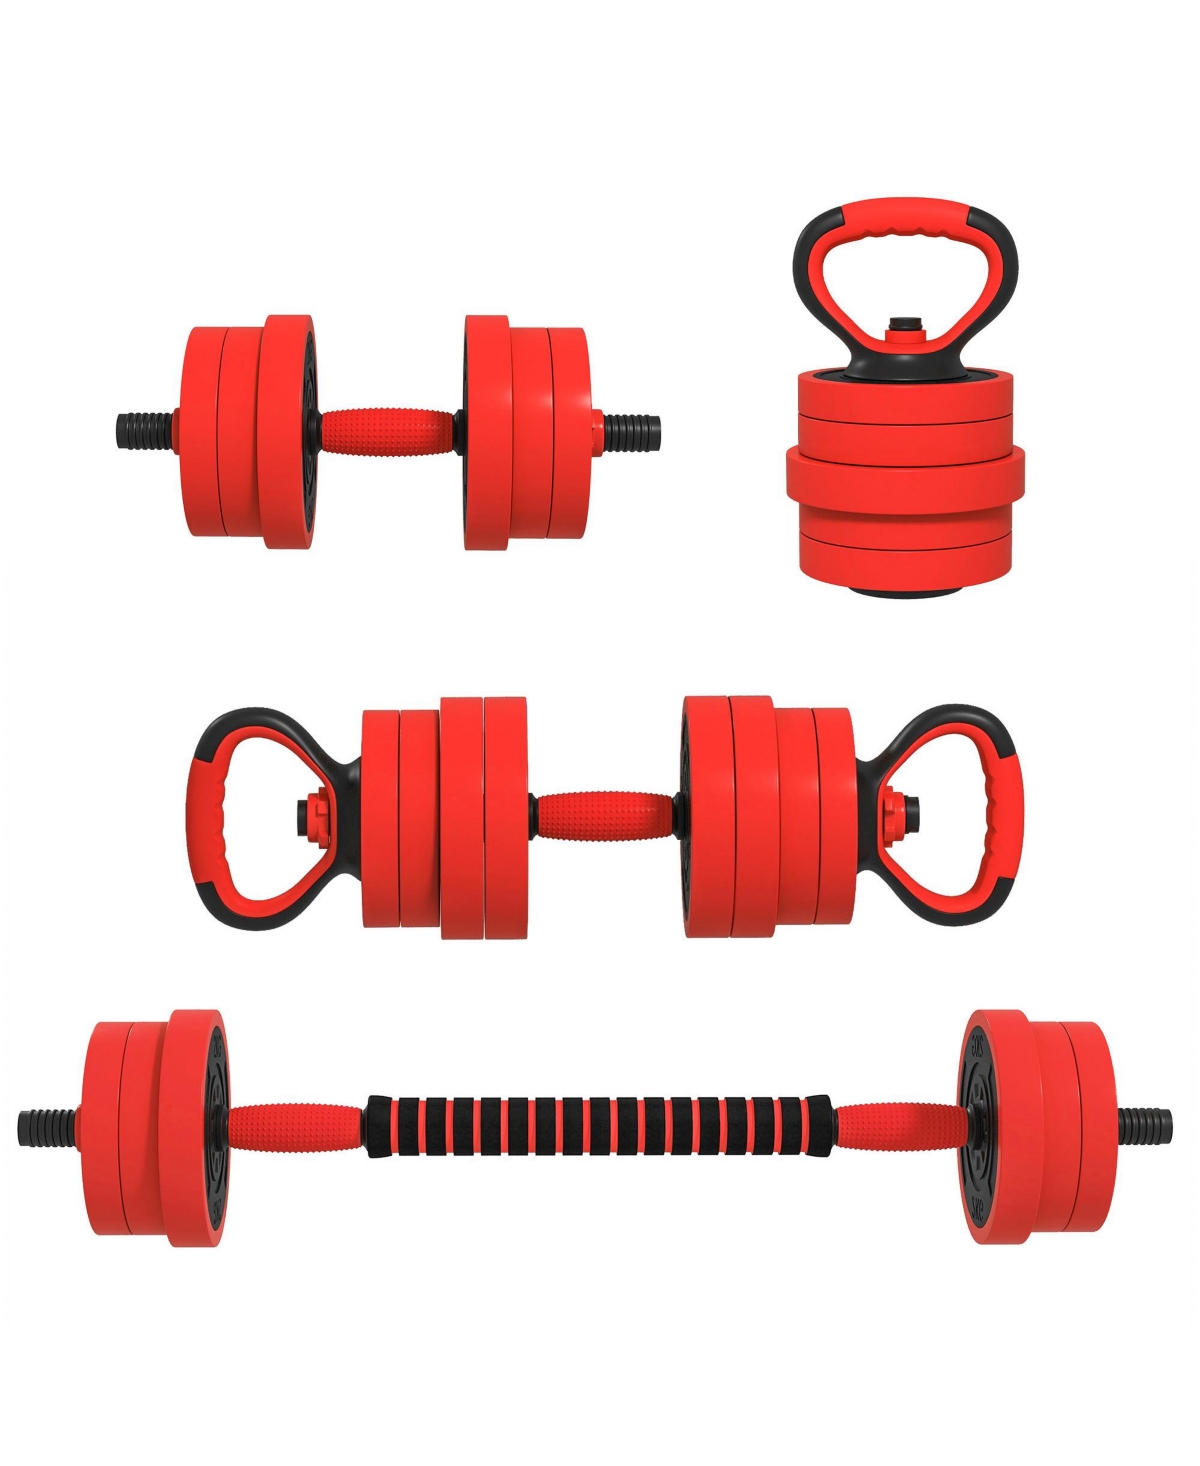 55LBS Dumbbells Set Used as Barbell, Kettle bell, Push up Stand - Red